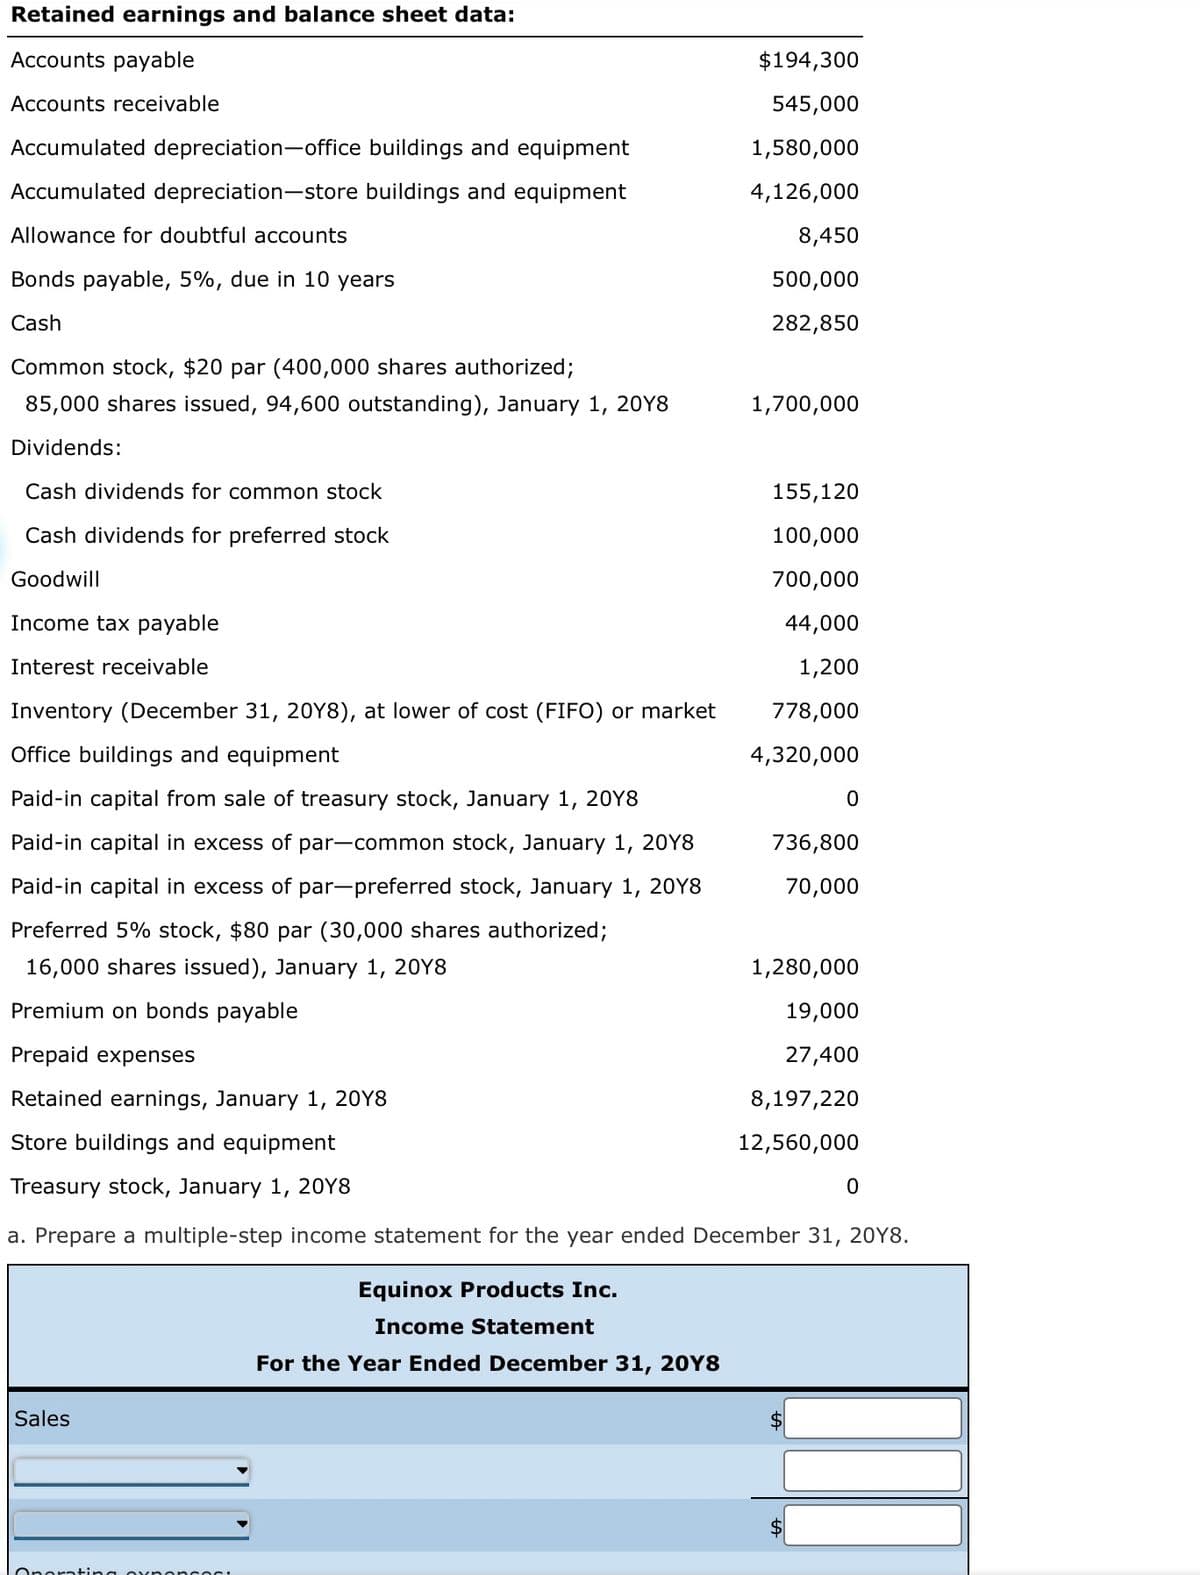 Retained earnings and balance sheet data:
Accounts payable
Accounts receivable
Accumulated depreciation-office buildings and equipment
Accumulated depreciation-store buildings and equipment
Allowance for doubtful accounts
Bonds payable, 5%, due in 10 years
Cash
Common stock, $20 par (400,000 shares authorized;
85,000 shares issued, 94,600 outstanding), January 1, 20Y8
Dividends:
Sales
$194,300
545,000
1,580,000
4,126,000
Operating oxpopcos:
8,450
500,000
282,850
Cash dividends for common stock
Cash dividends for preferred stock
Goodwill
Income tax payable
Interest receivable
Inventory (December 31, 20Y8), at lower of cost (FIFO) or market
Office buildings and equipment
Paid-in capital from sale of treasury stock, January 1, 2018
Paid-in capital in excess of par-common stock, January 1, 20Y8
Paid-in capital in excess of par-preferred stock, January 1, 20Y8
Preferred 5% stock, $80 par (30,000 shares authorized;
16,000 shares issued), January 1, 20Y8
Premium on bonds payable
Prepaid expenses
Retained earnings, January 1, 20Y8
Store buildings and equipment
Treasury stock, January 1, 20Y8
a. Prepare a multiple-step income statement for the year ended December 31, 20Y8.
Equinox Products Inc.
Income Statement
For the Year Ended December 31, 20Y8
1,700,000
155,120
100,000
700,000
44,000
1,200
778,000
4,320,000
736,800
70,000
0
1,280,000
19,000
27,400
8,197,220
12,560,000
$
$
0